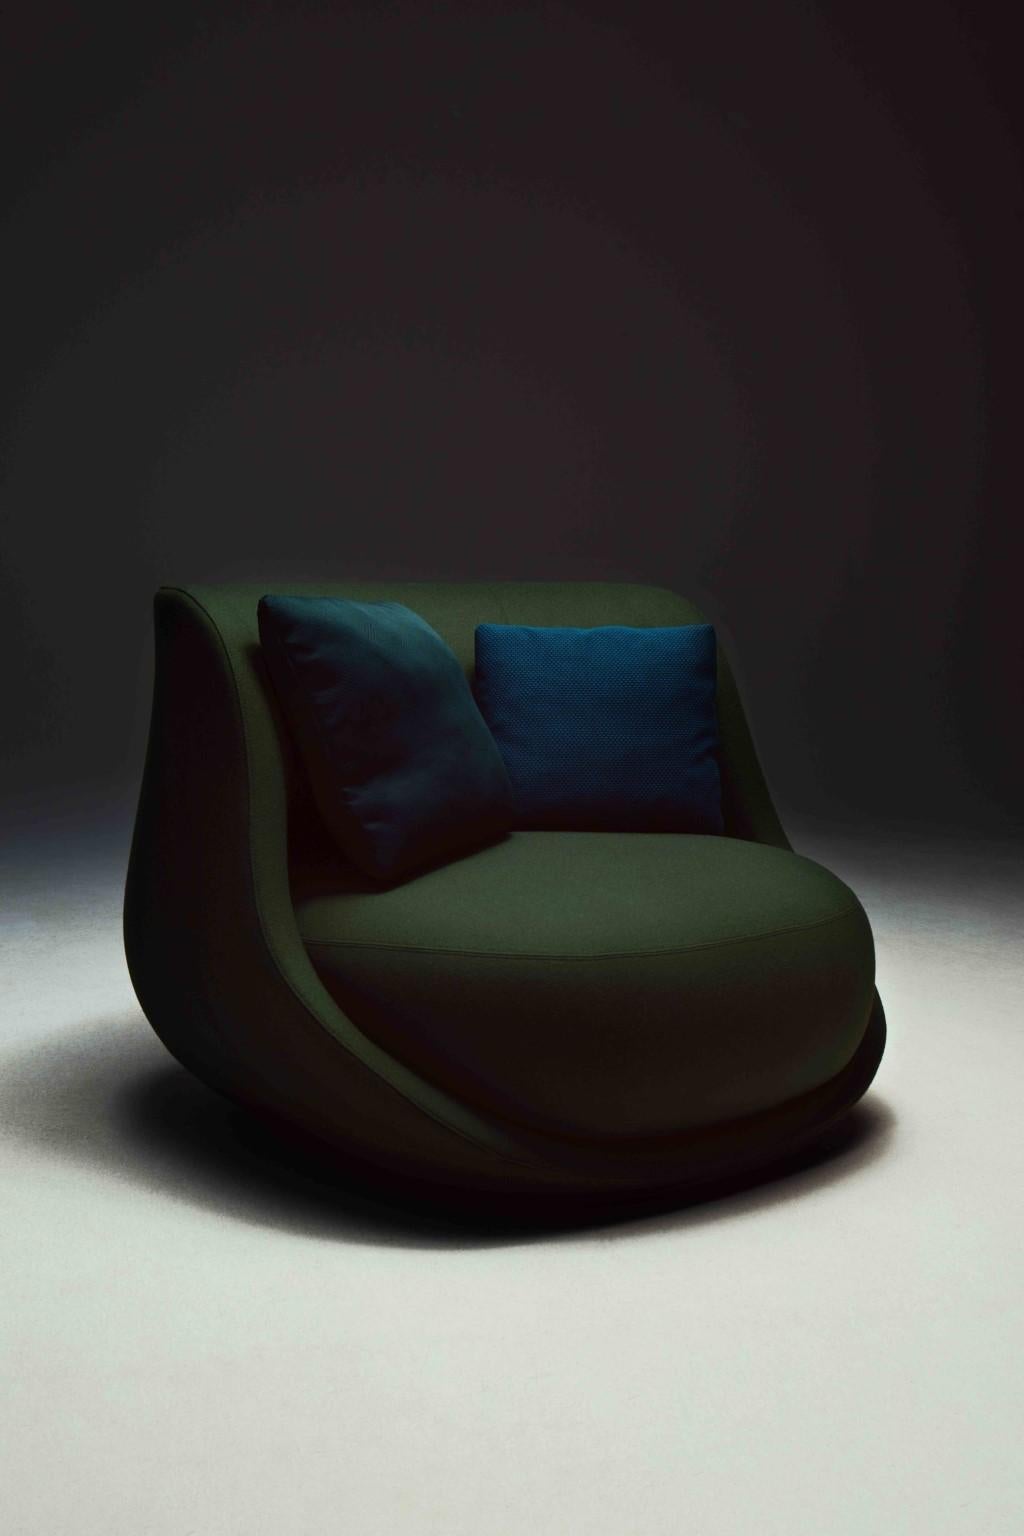 Canapé sofa by Luca Nichetto 
Dimensions: W 175 x D 106 x H 77
Materials: fabric 
Also available in leather.
Cushions are not included.

Liaison is the story of a daring shell, formed to wrap within a soft cocoon of seating. Generous in appearance,